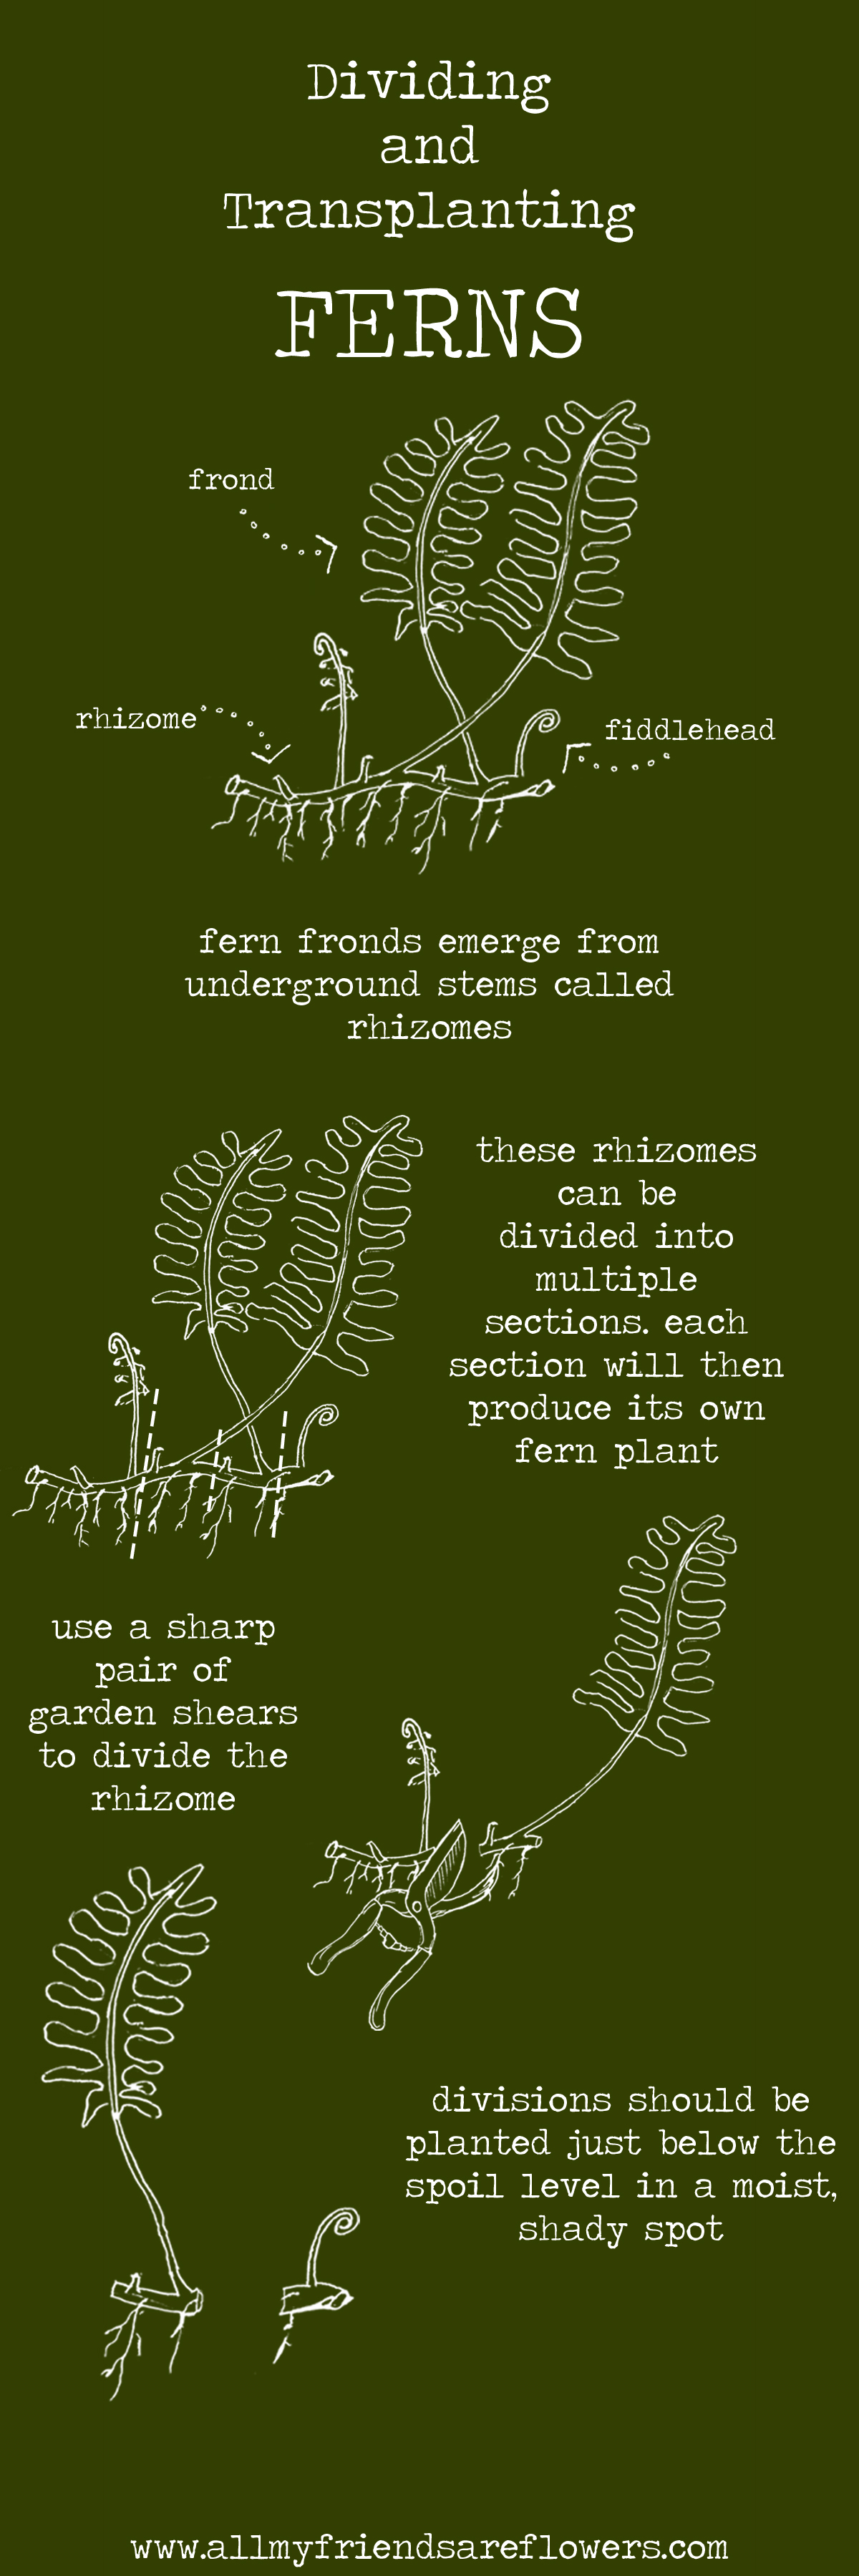 How to Divide Ferns 